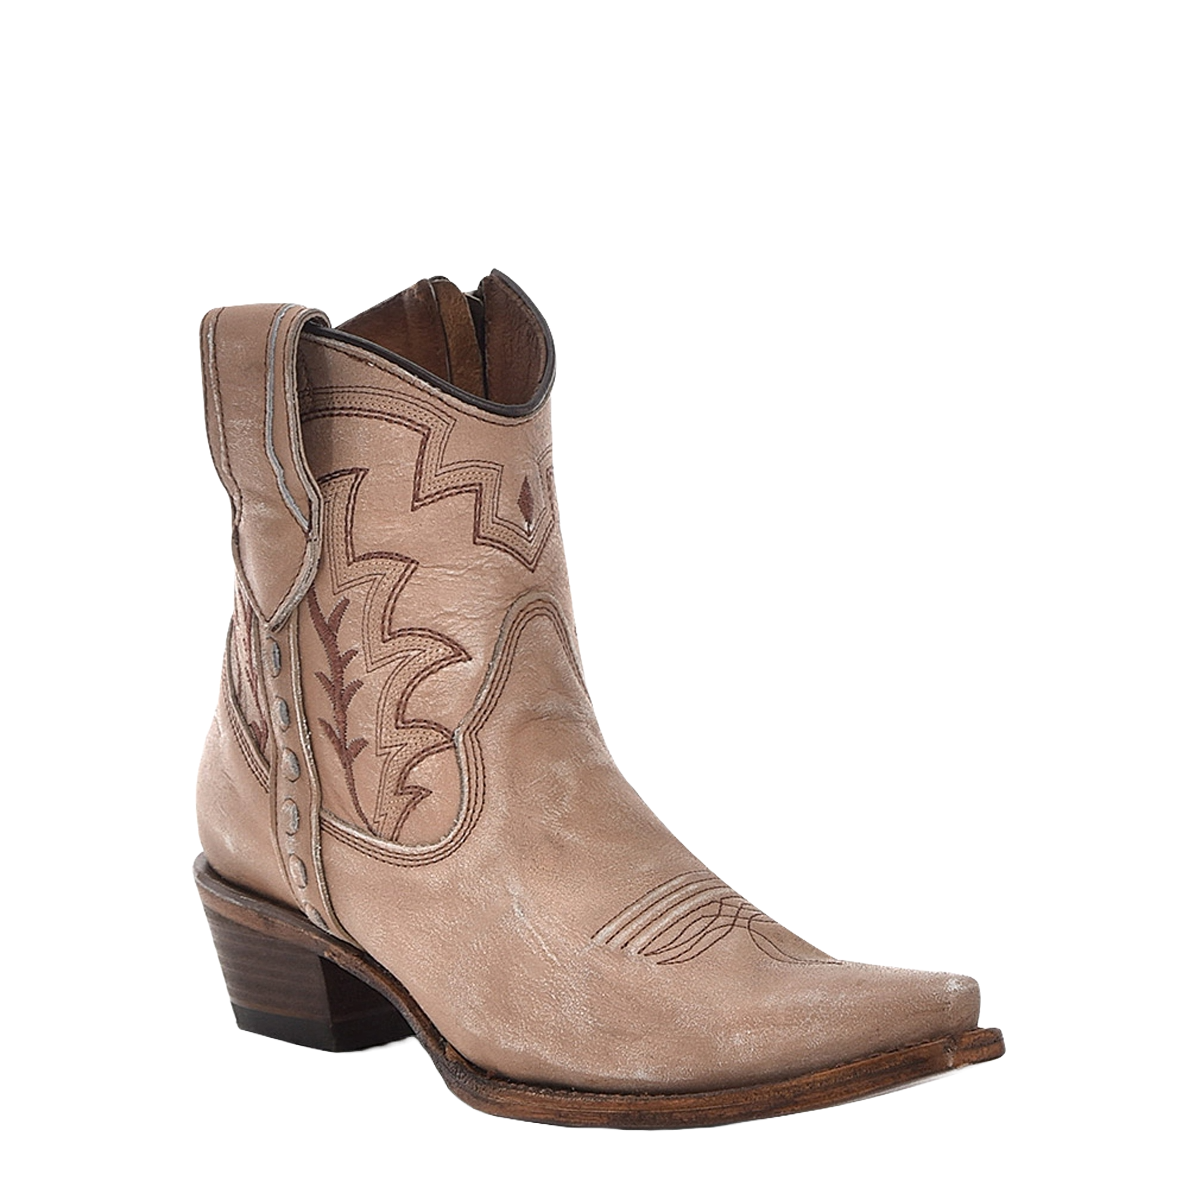 Circle G Ladies Sand Embroidery & Zipper Ankle Boots L6098